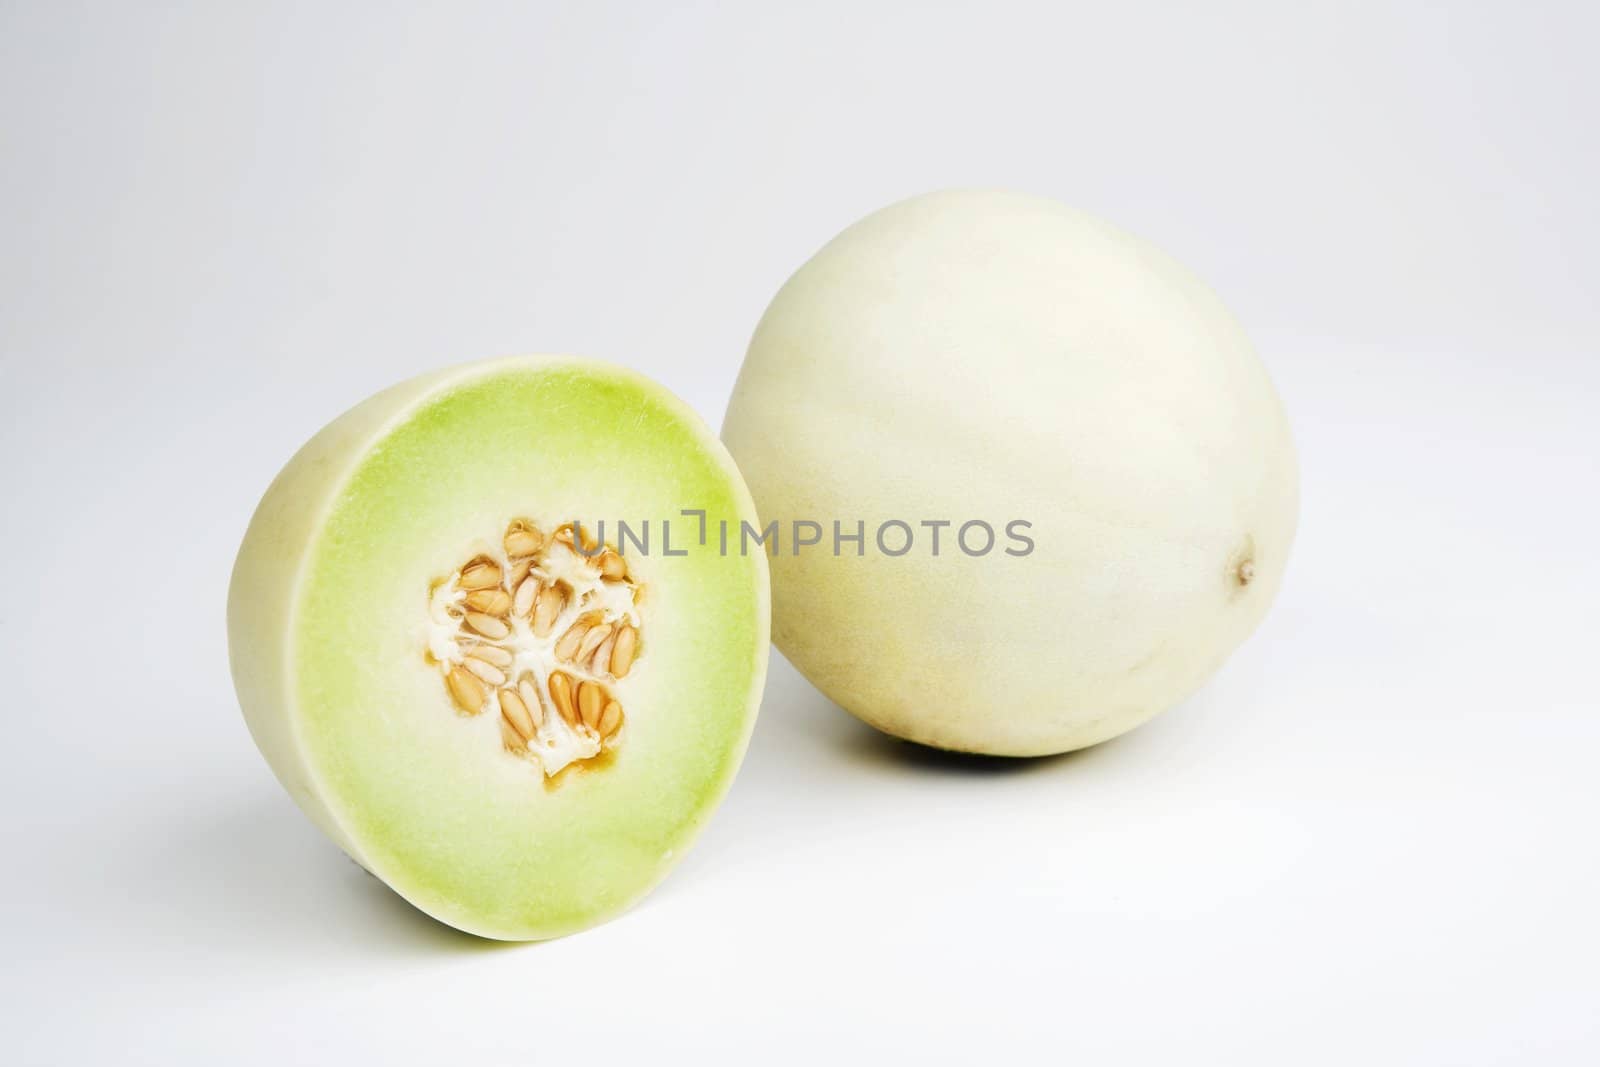 Two halves of a honeydew melon on a white background